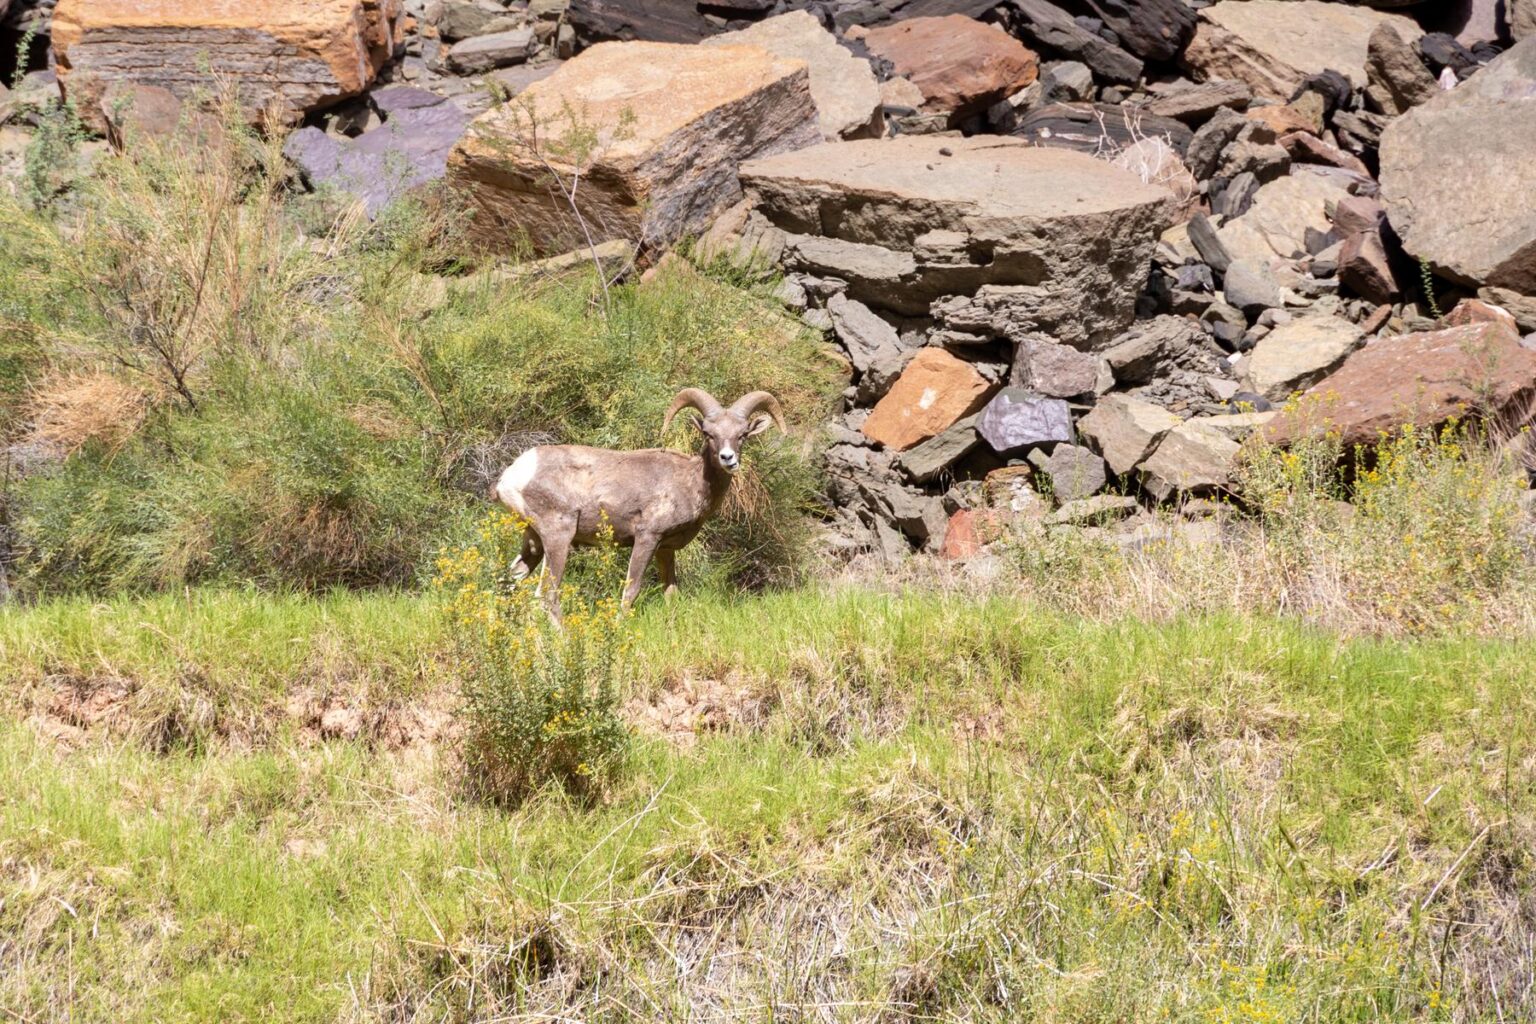 A single bighorn sheep grazes in a patch of shrubbery in Grand Canyon.